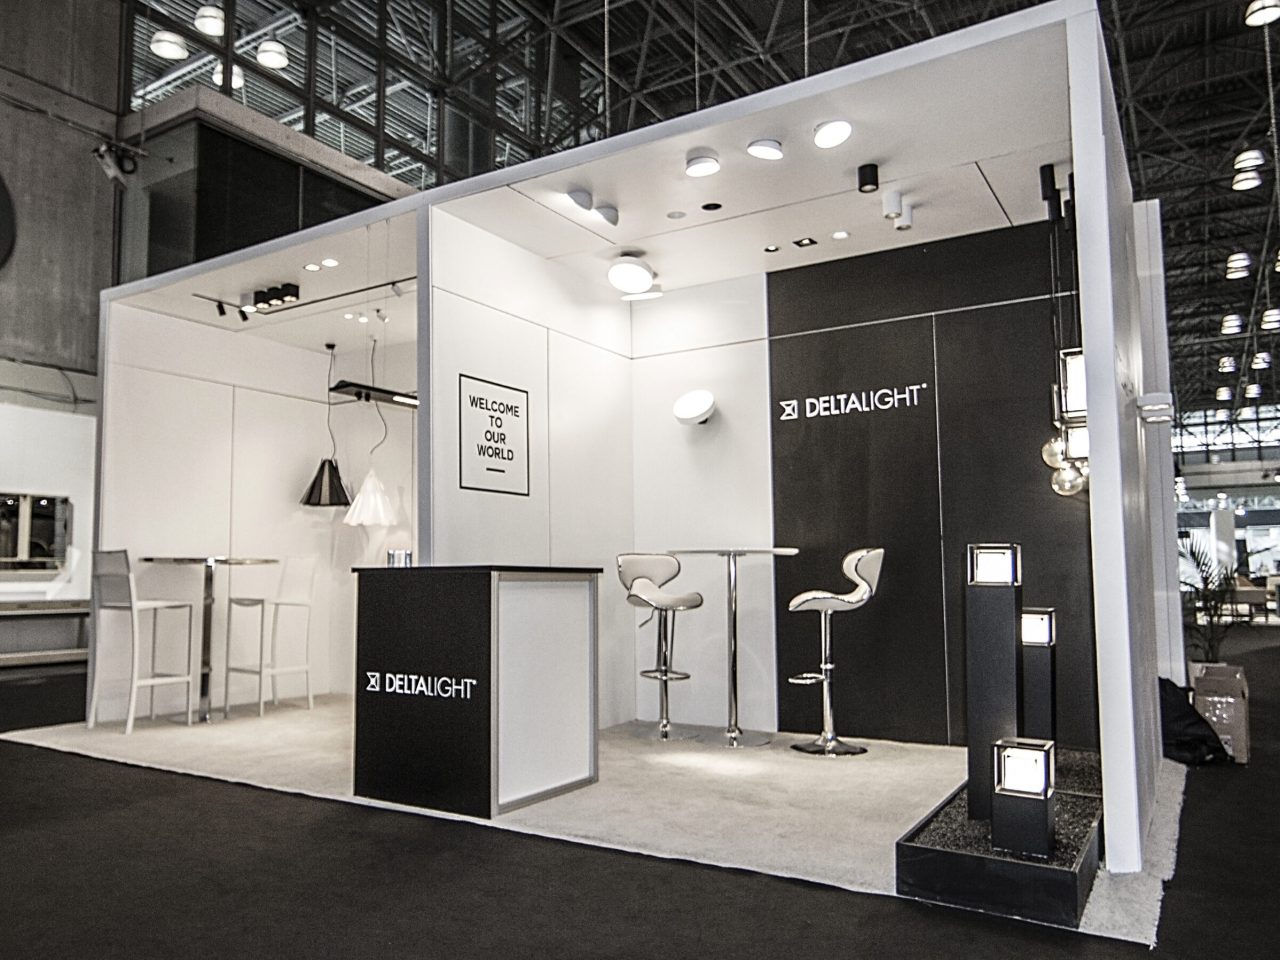 Full View of Delta Light's Rental Exhibit at the International Contemporary Furniture Fair